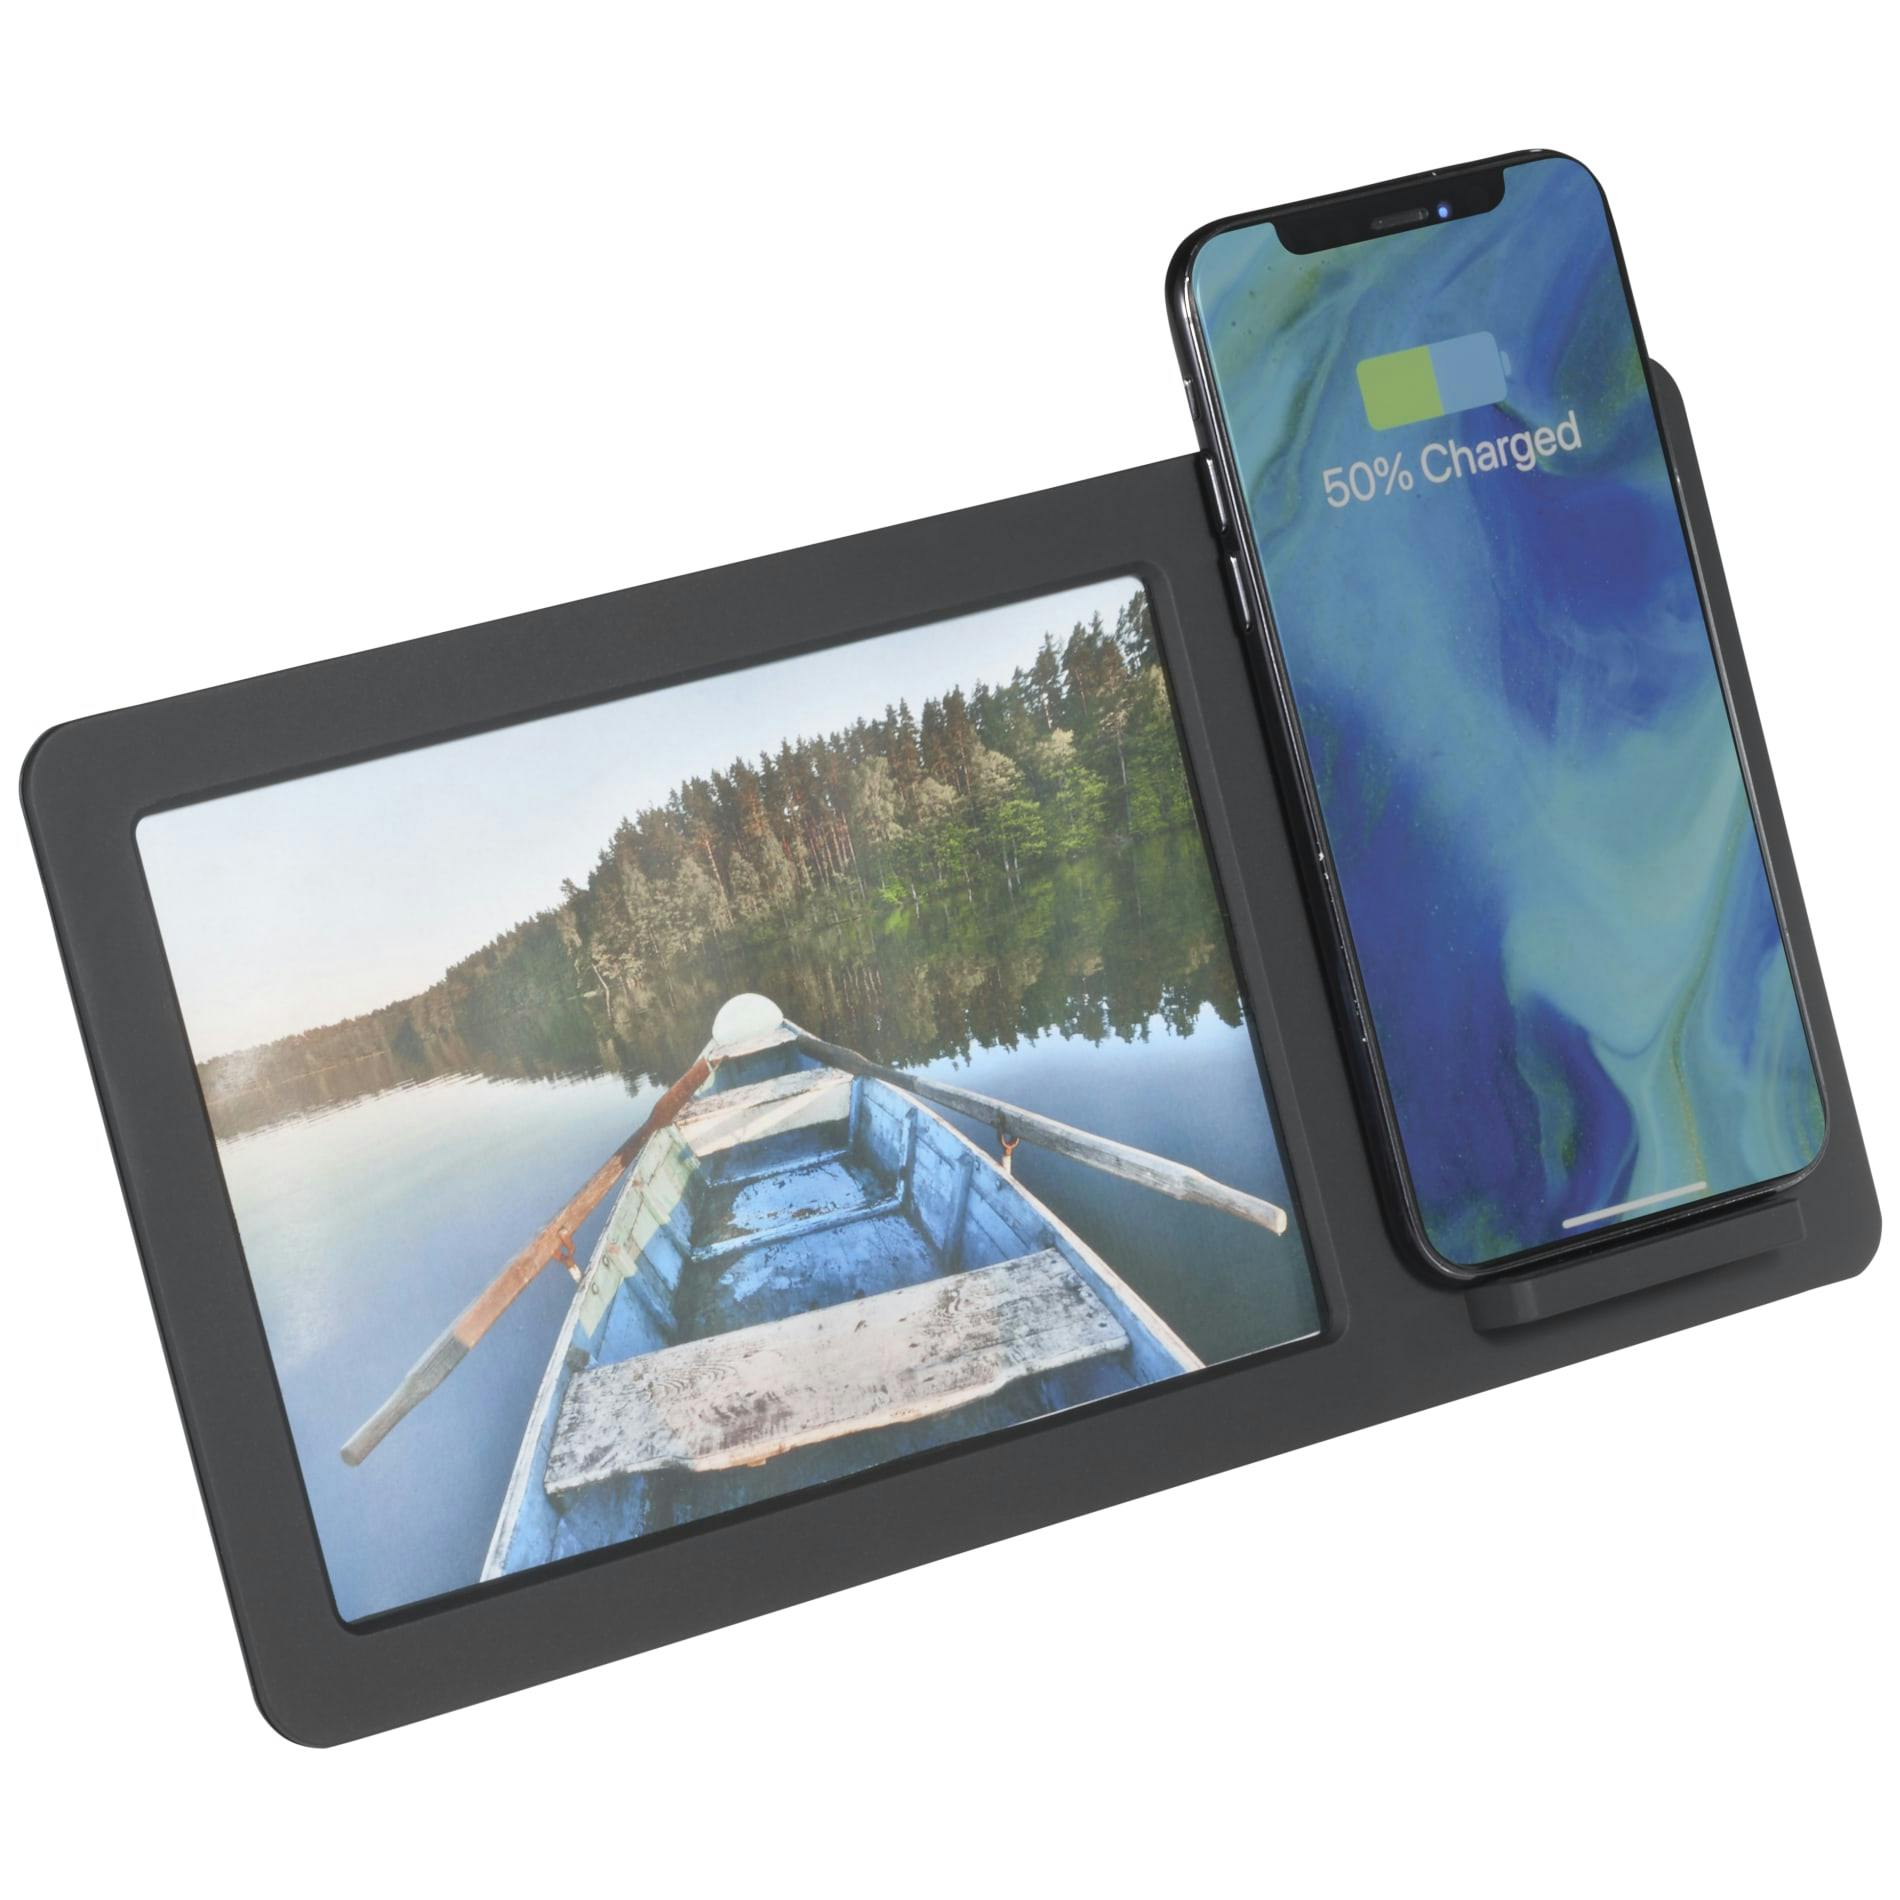 Glimpse Photo Frame with Wireless Charging Pad - additional Image 1